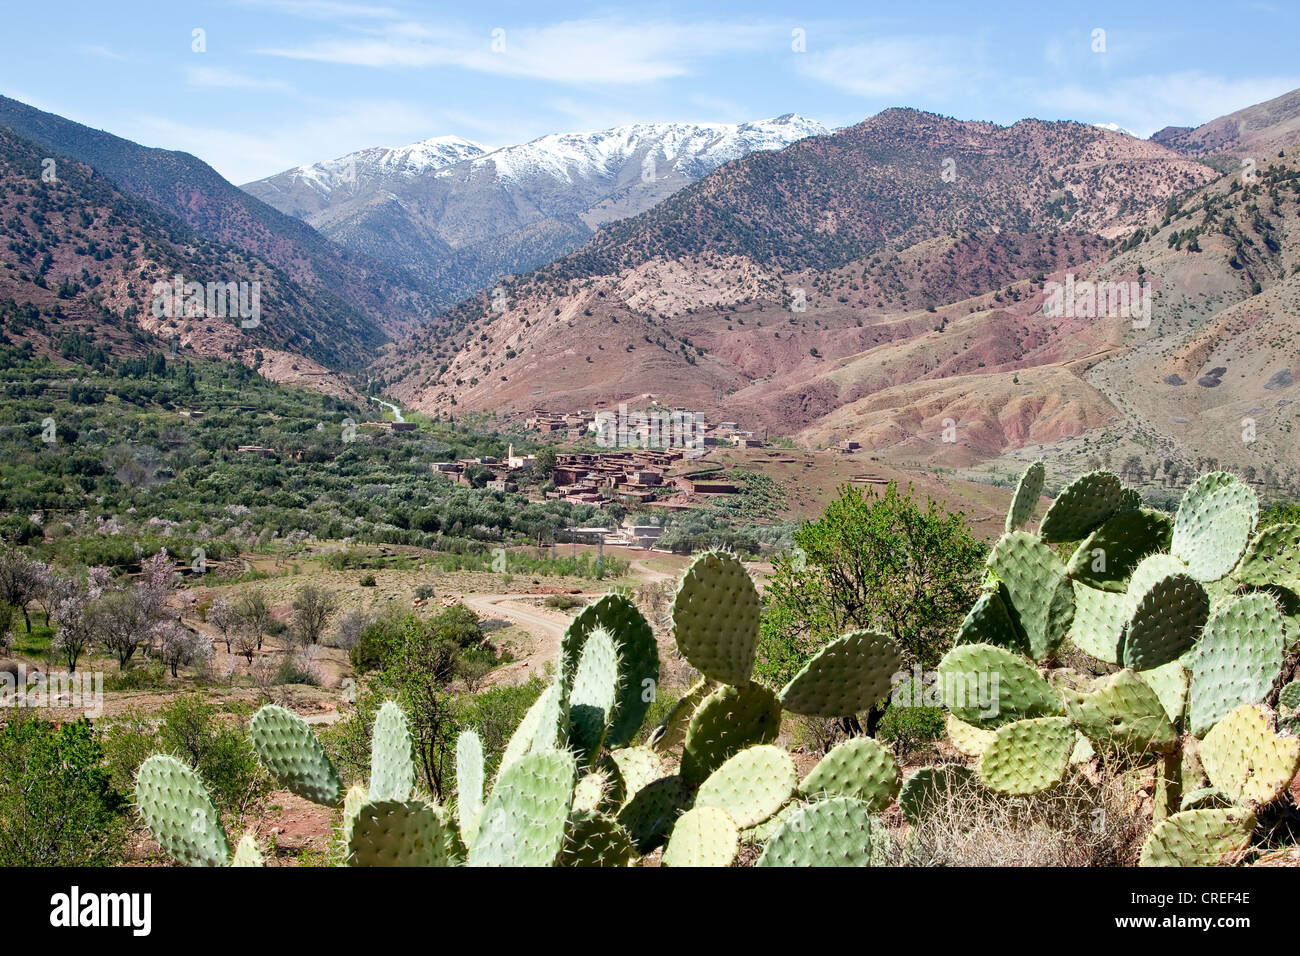 Mountain village with terraces near the Tizi-n-Test mountain pass, Tizi-n-Test mountain pass road in the High Atlas Mountains Stock Photo